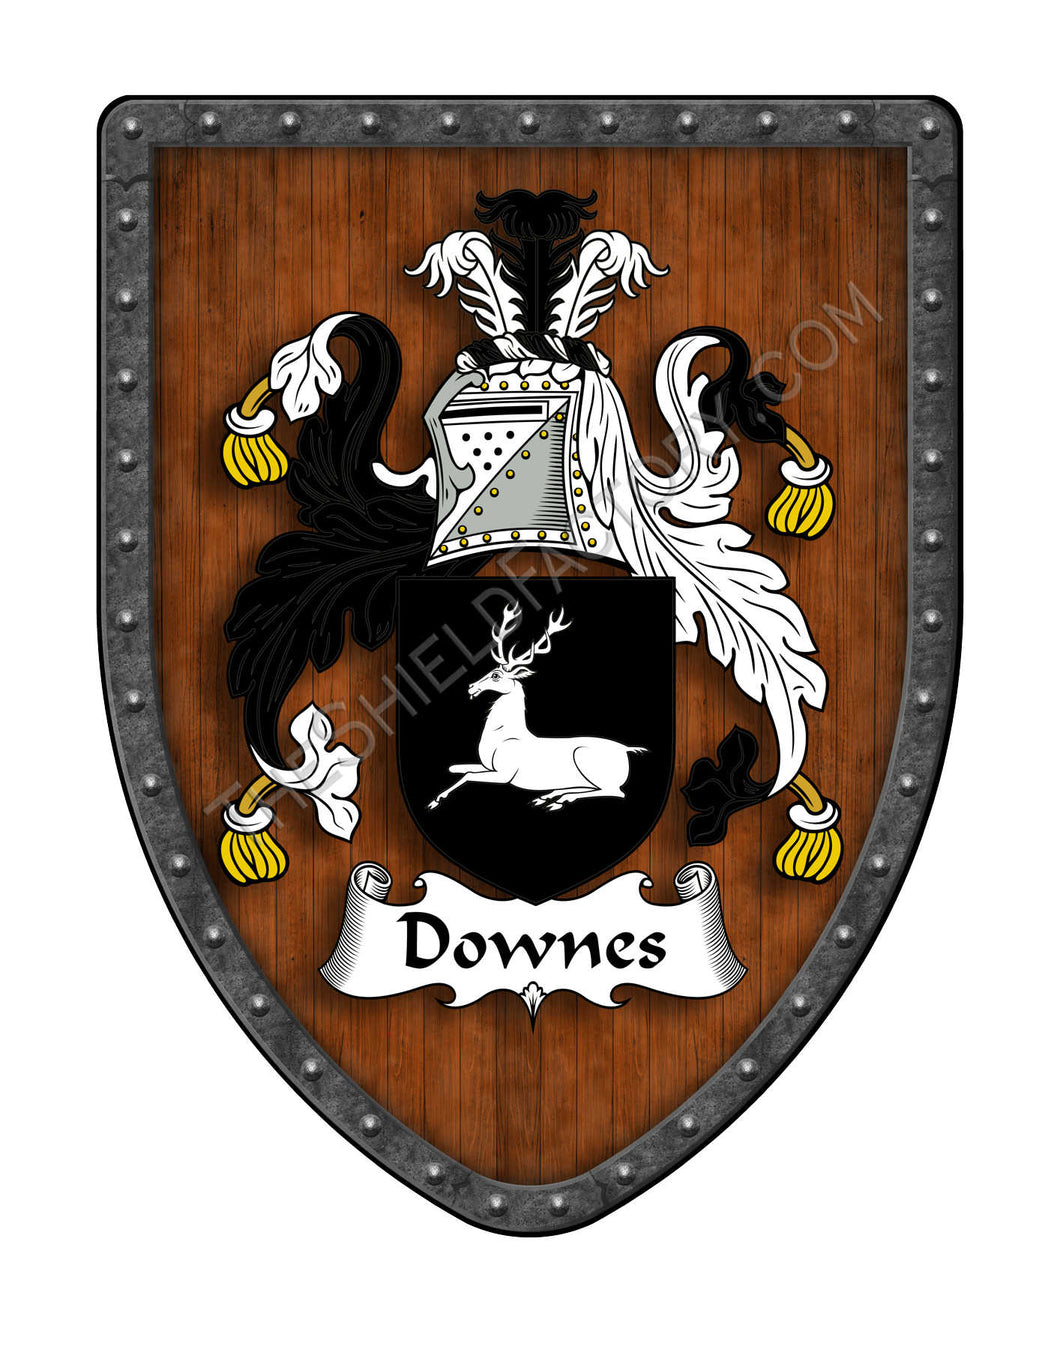 Downes Family Coat of Arms